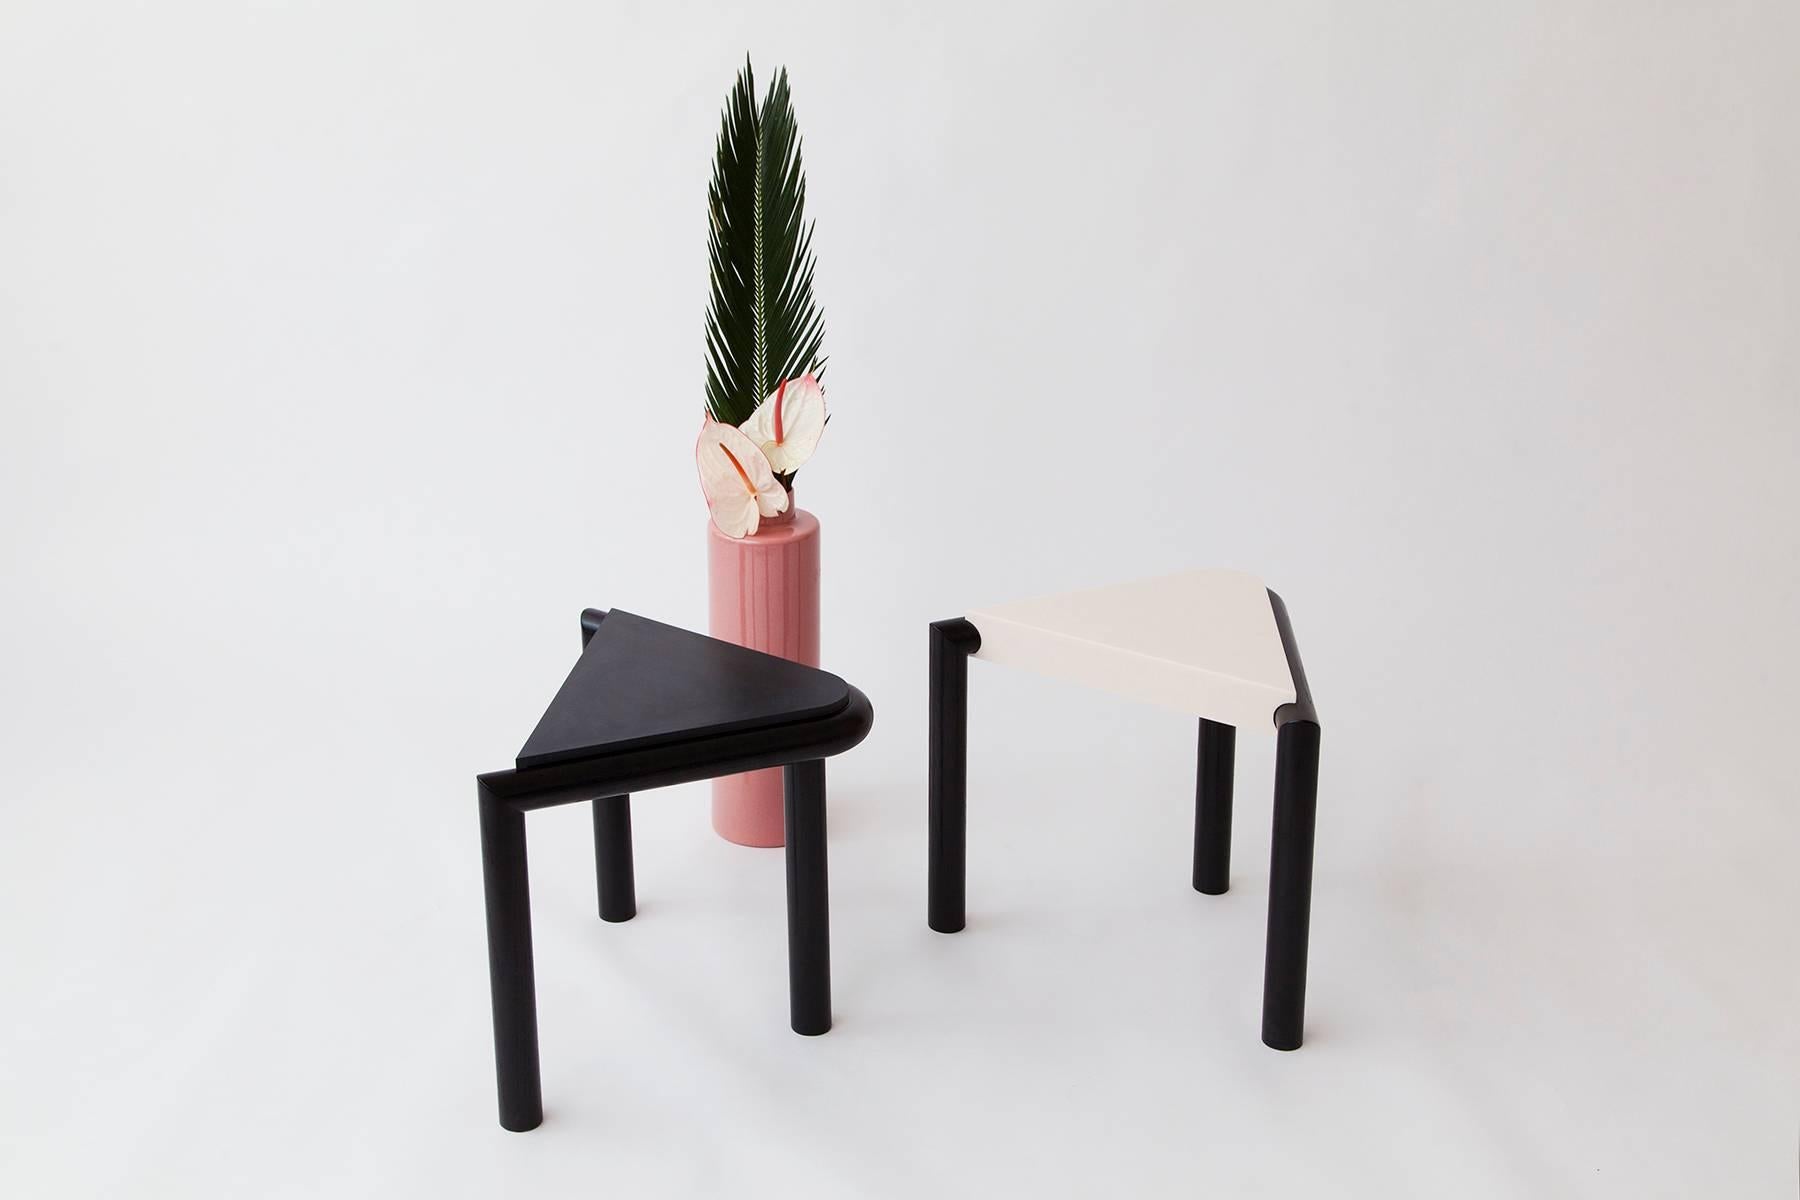 Not So General Gallery in Los Angeles is proud to present the Troika Stool. 

Originating from a tongue-in-cheek, literal rendering of seated legs, Troika stool or side table from Brooklyn design studio Vonnegut Kraft elegantly transforms with each